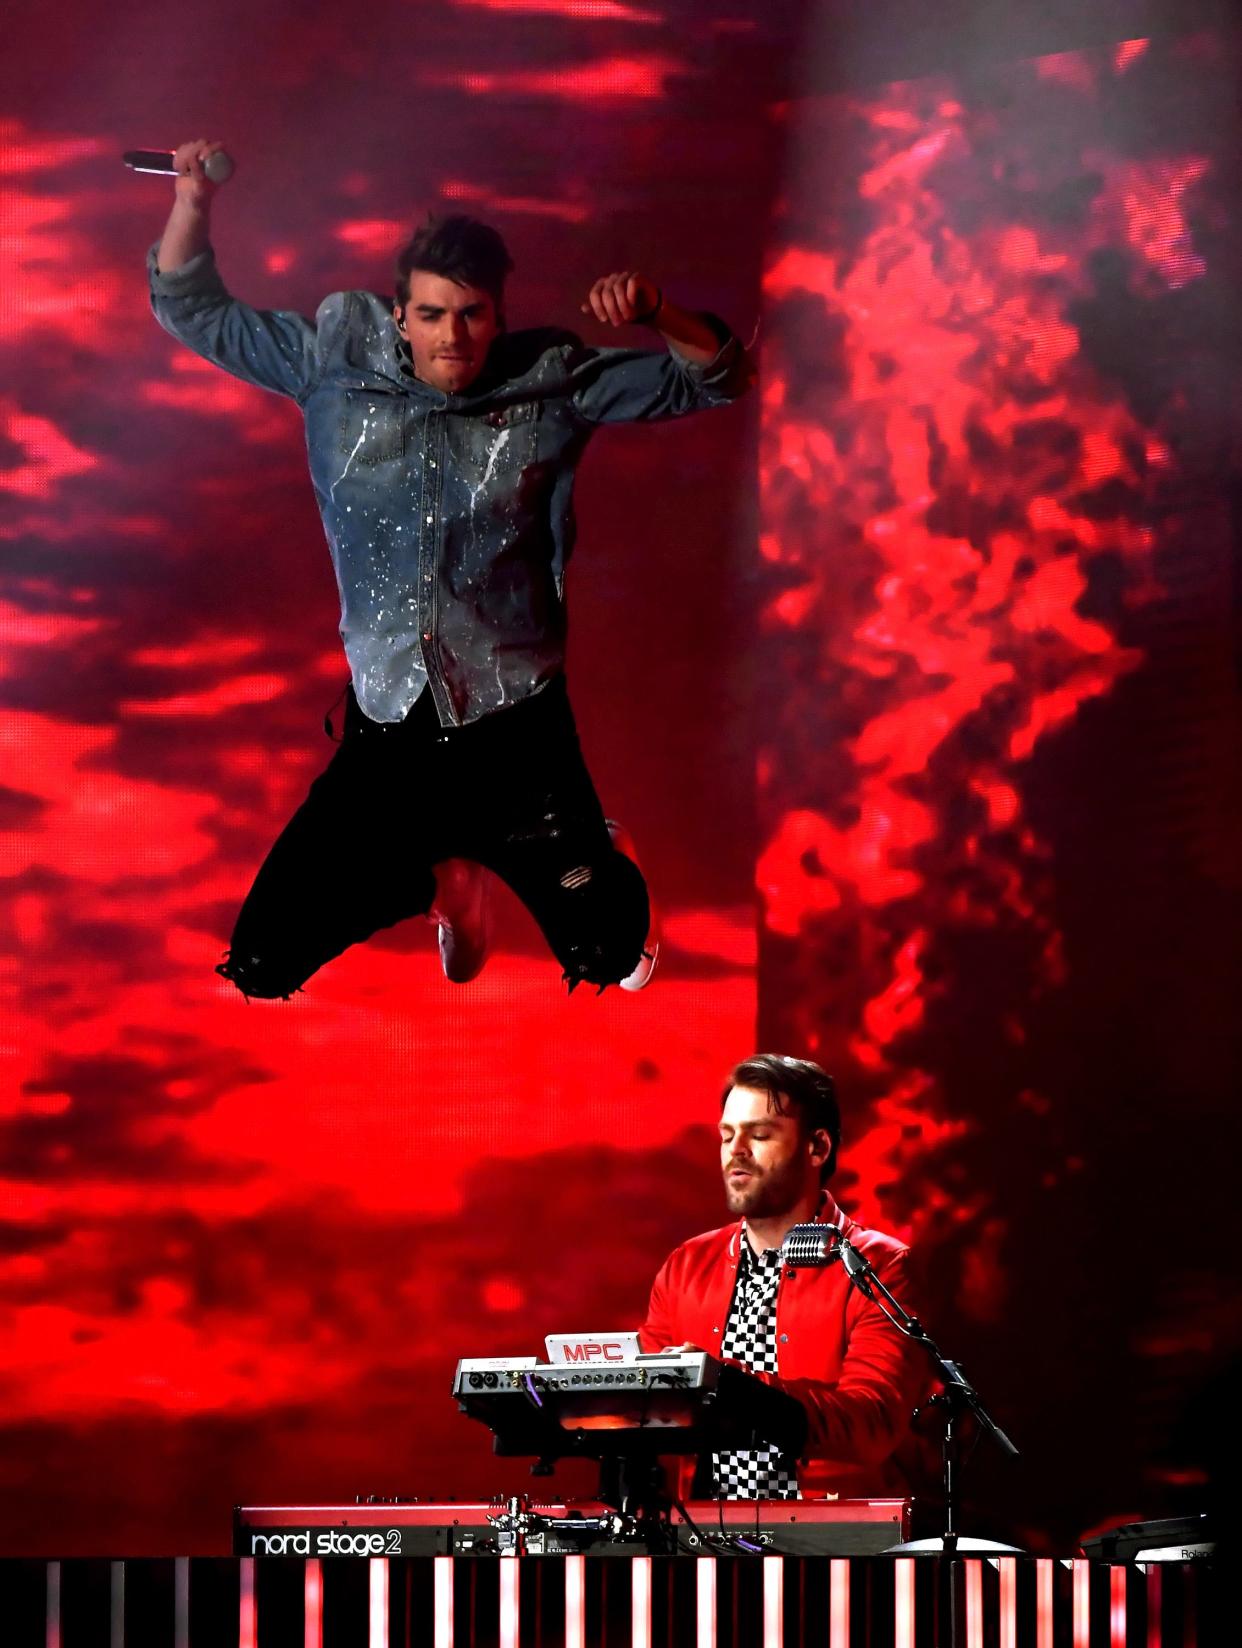 Andrew Taggart, left, gets some air as band mate Alex Pall of The Chainsmokers performs during the 2017 Billboard Music Awards at T-Mobile Arena.